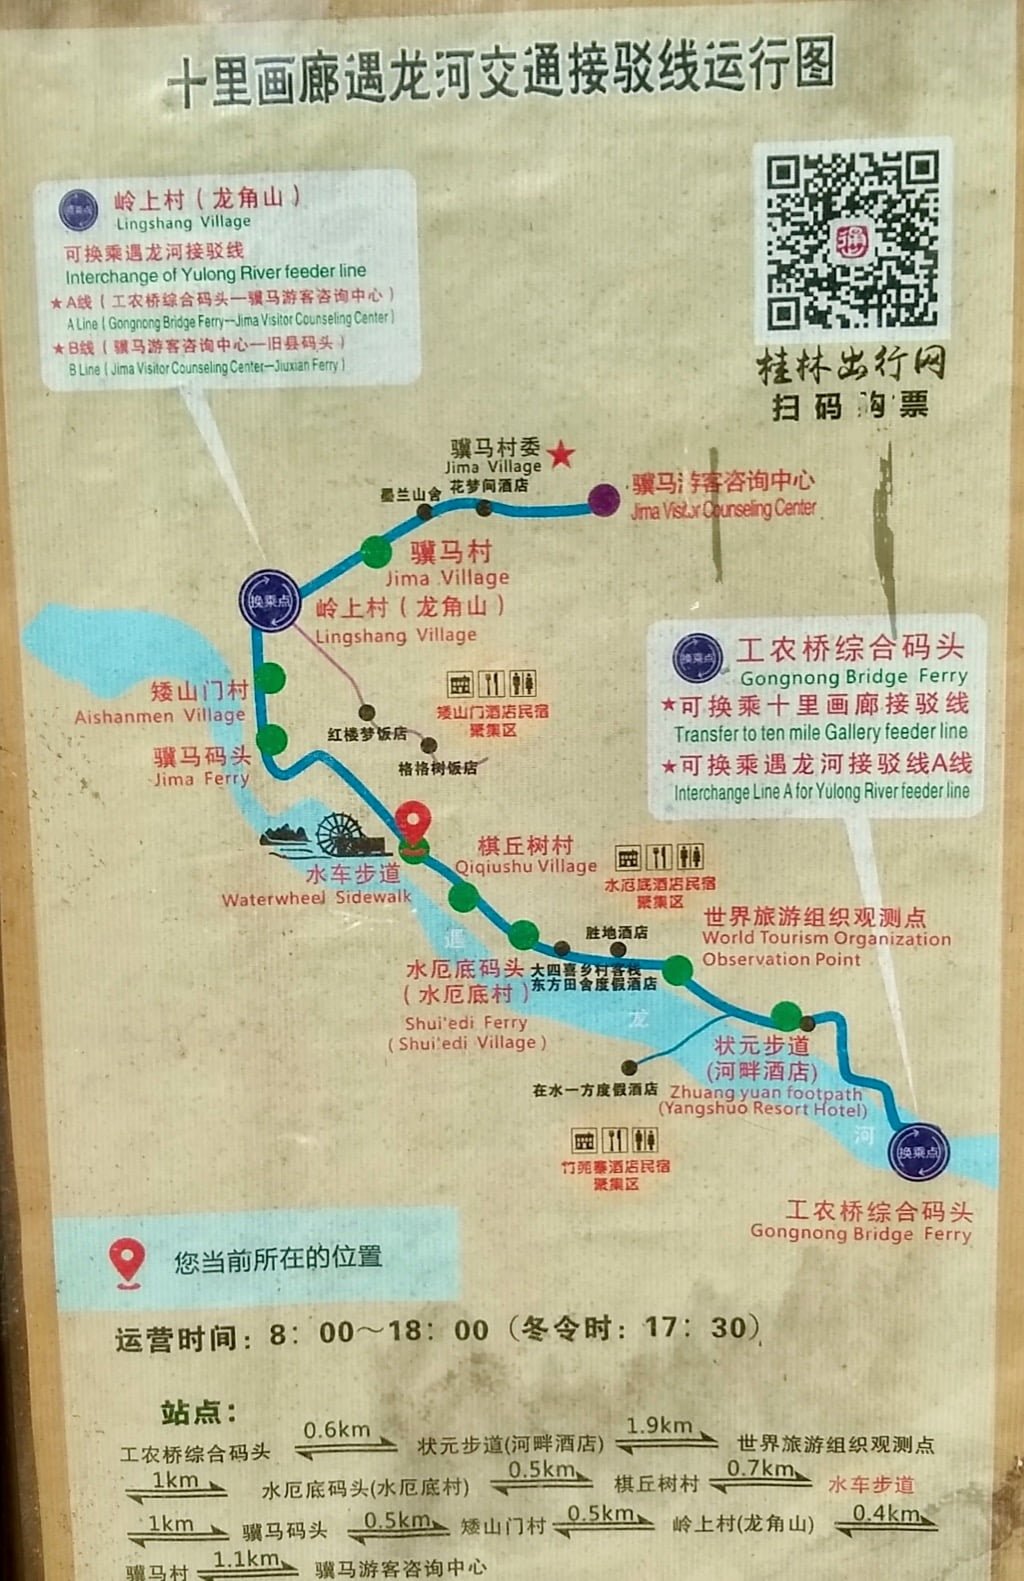 a map of a portion of the 10-Mile Gallery in Yangshuo, China